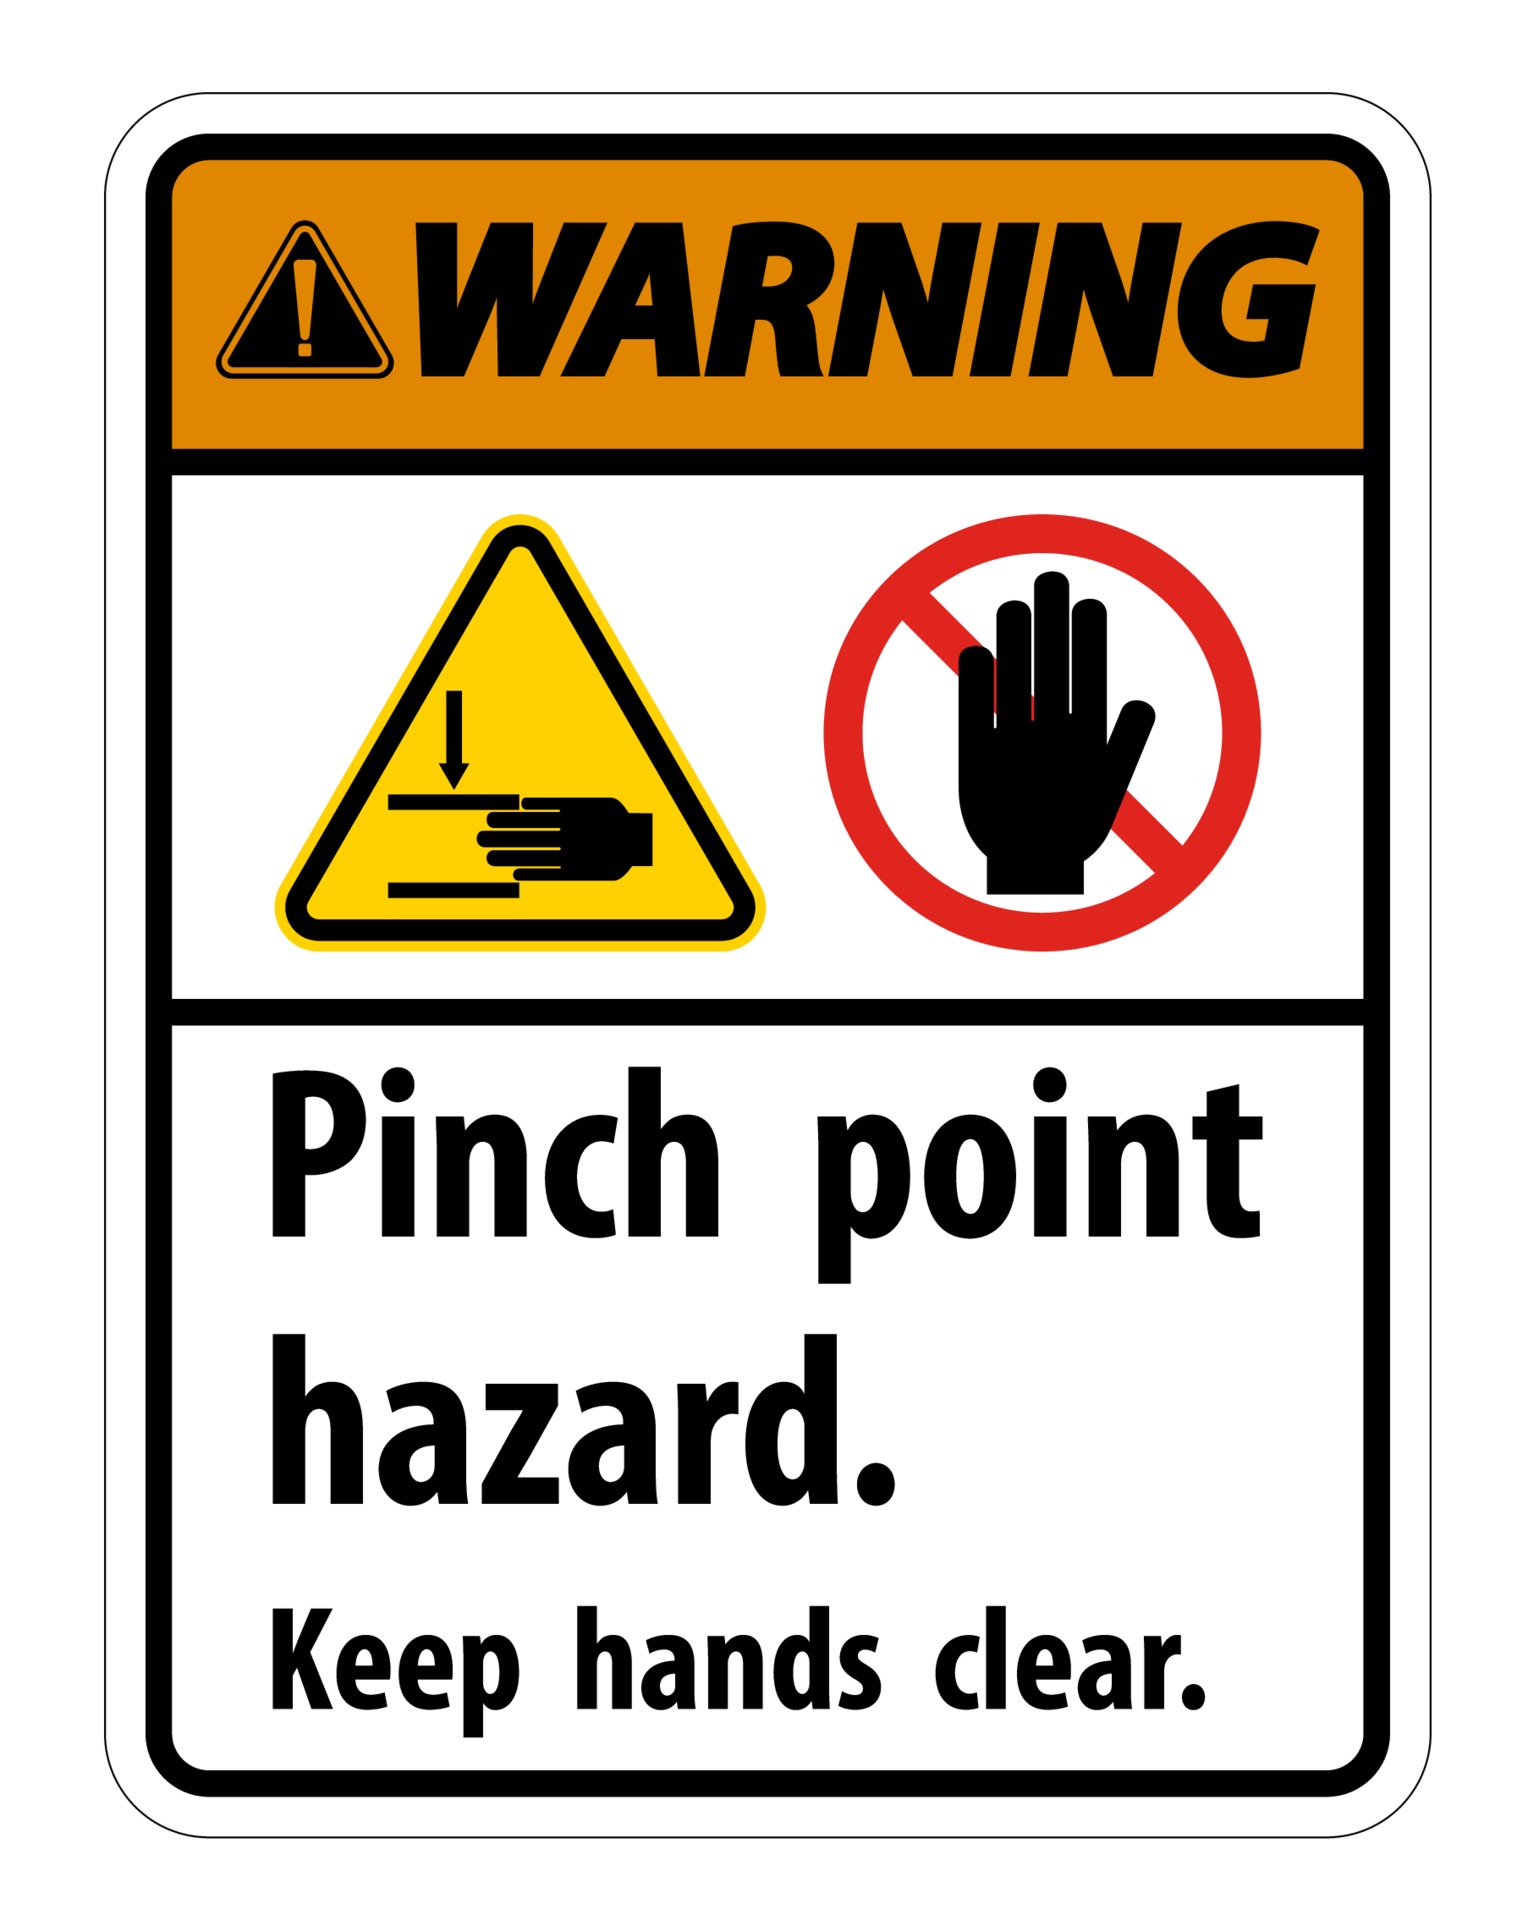 Keep point. Crush Hazard. Mind your hands знак. Pinch point. Clear symbol. Keep hands Clear sign.